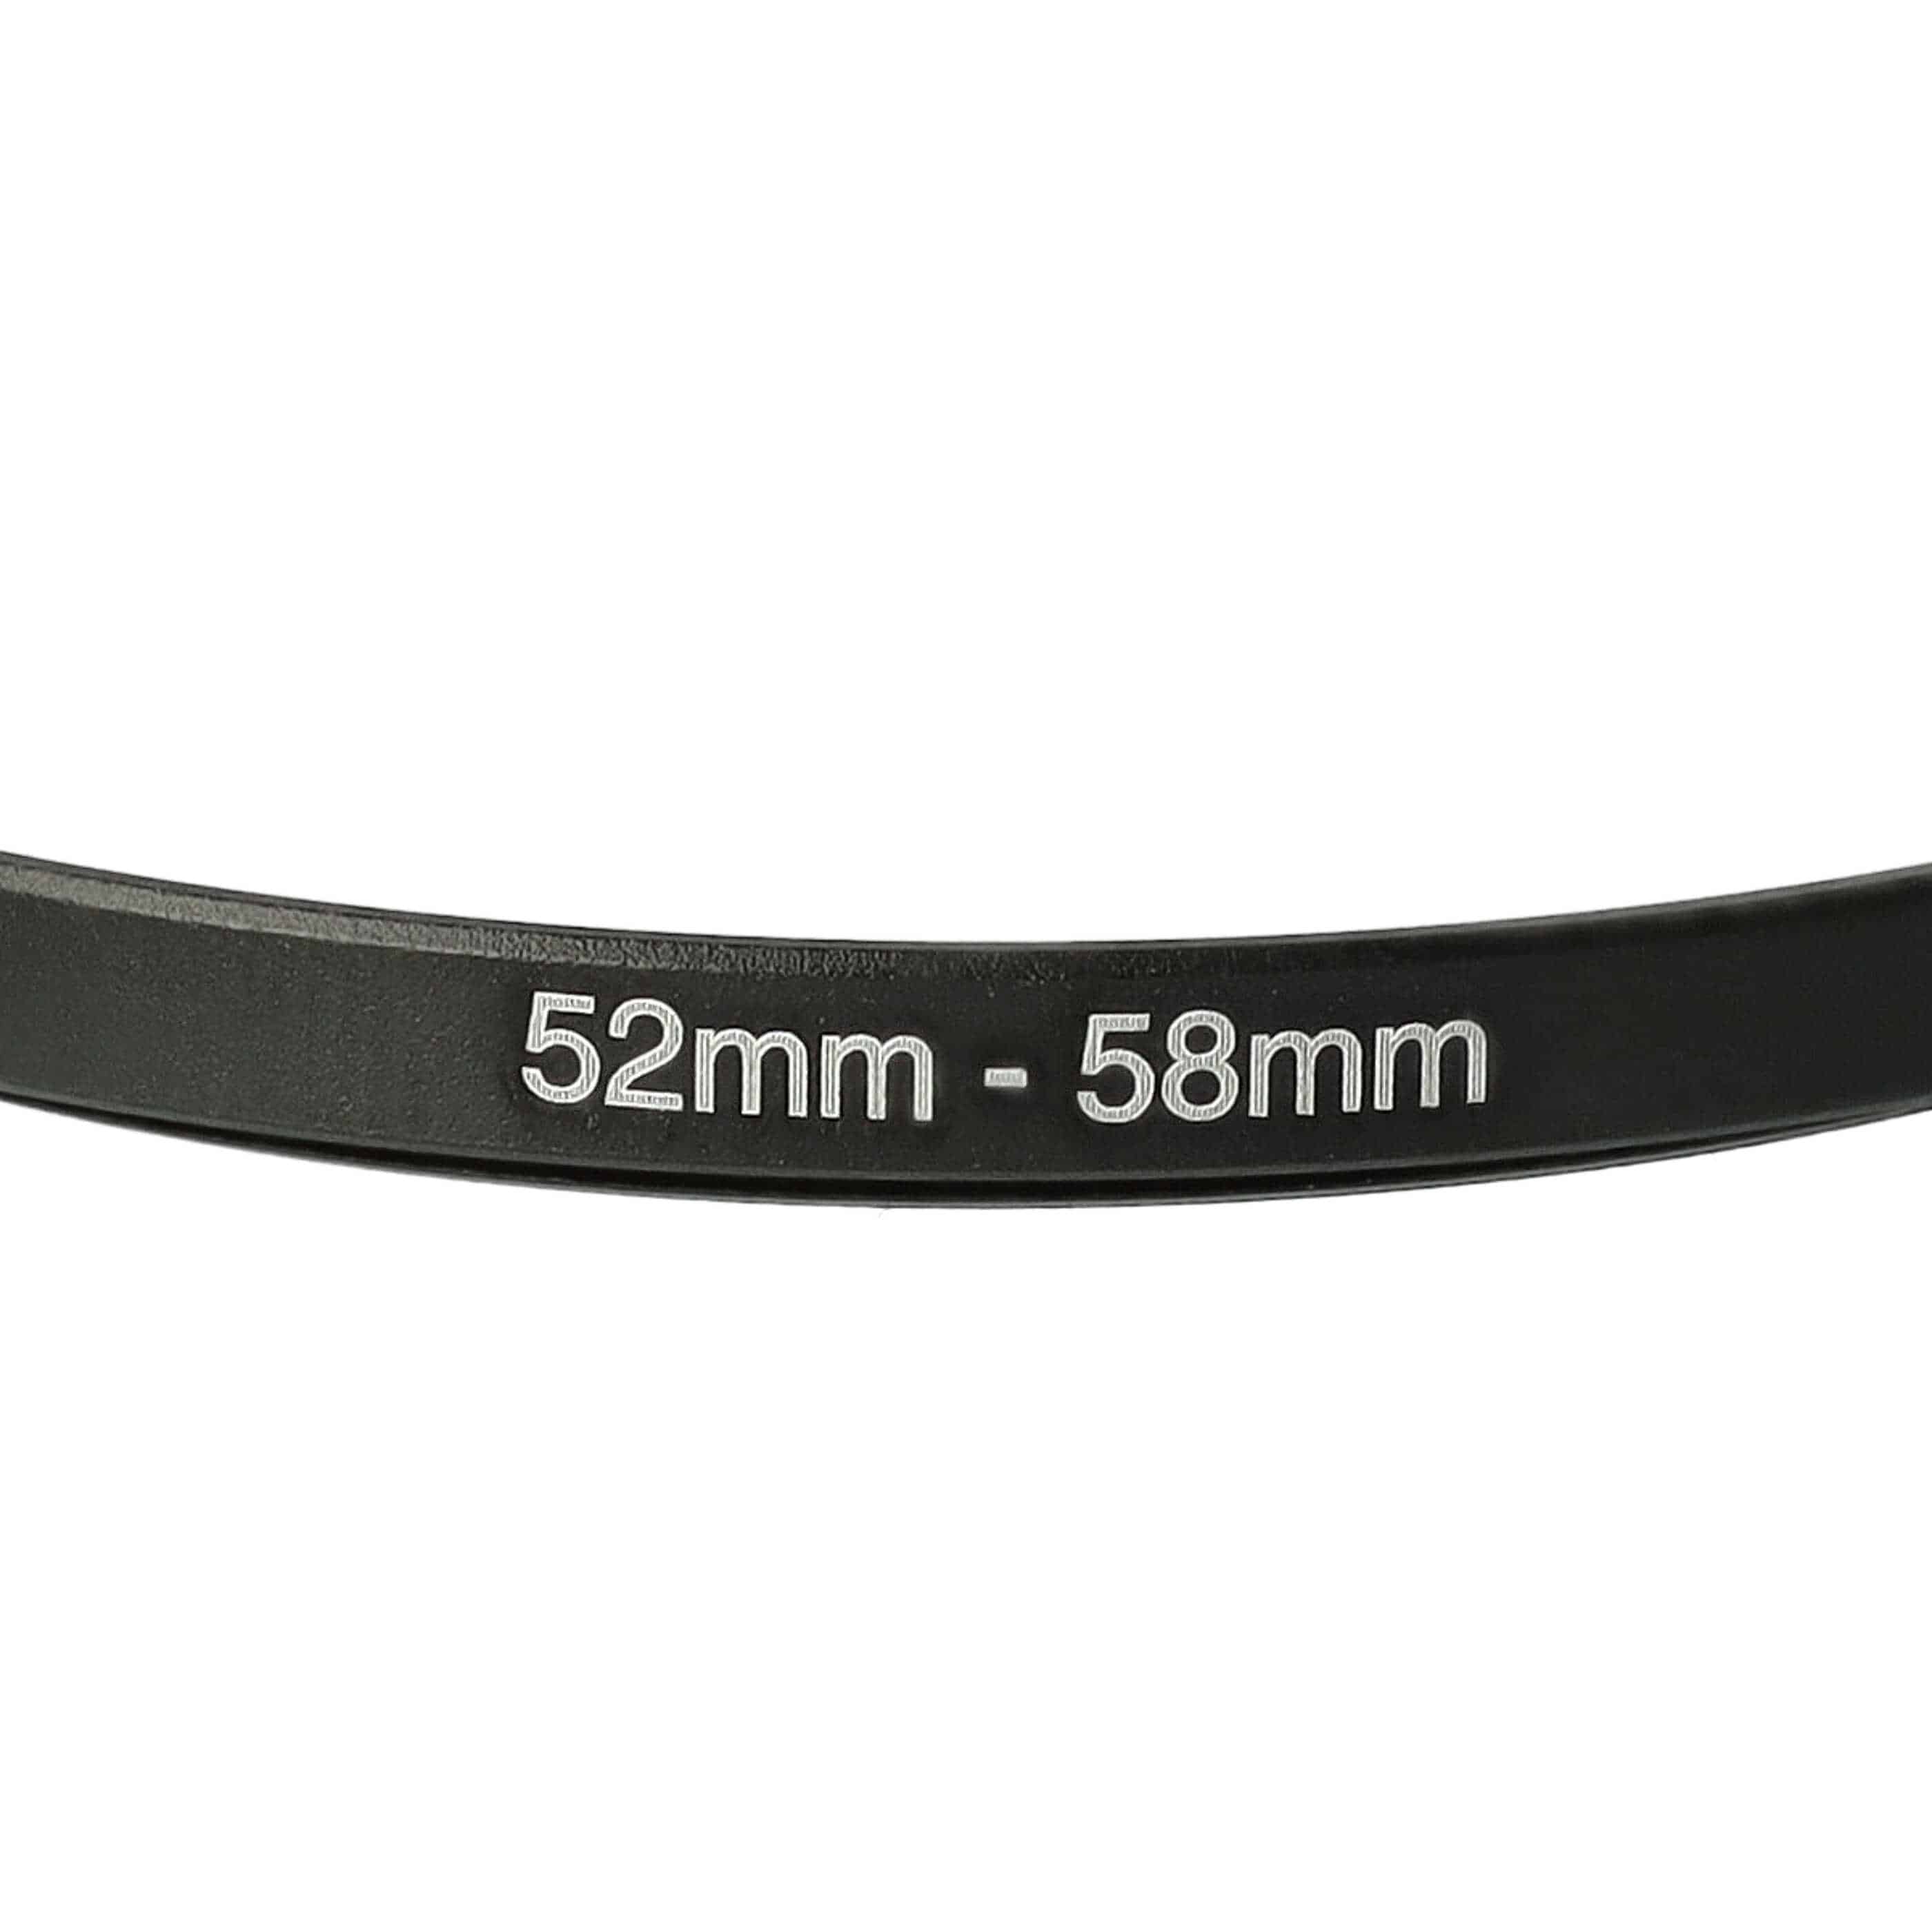 Step-Up Ring Adapter of 52 mm to 58 mmfor various Camera Lens - Filter Adapter